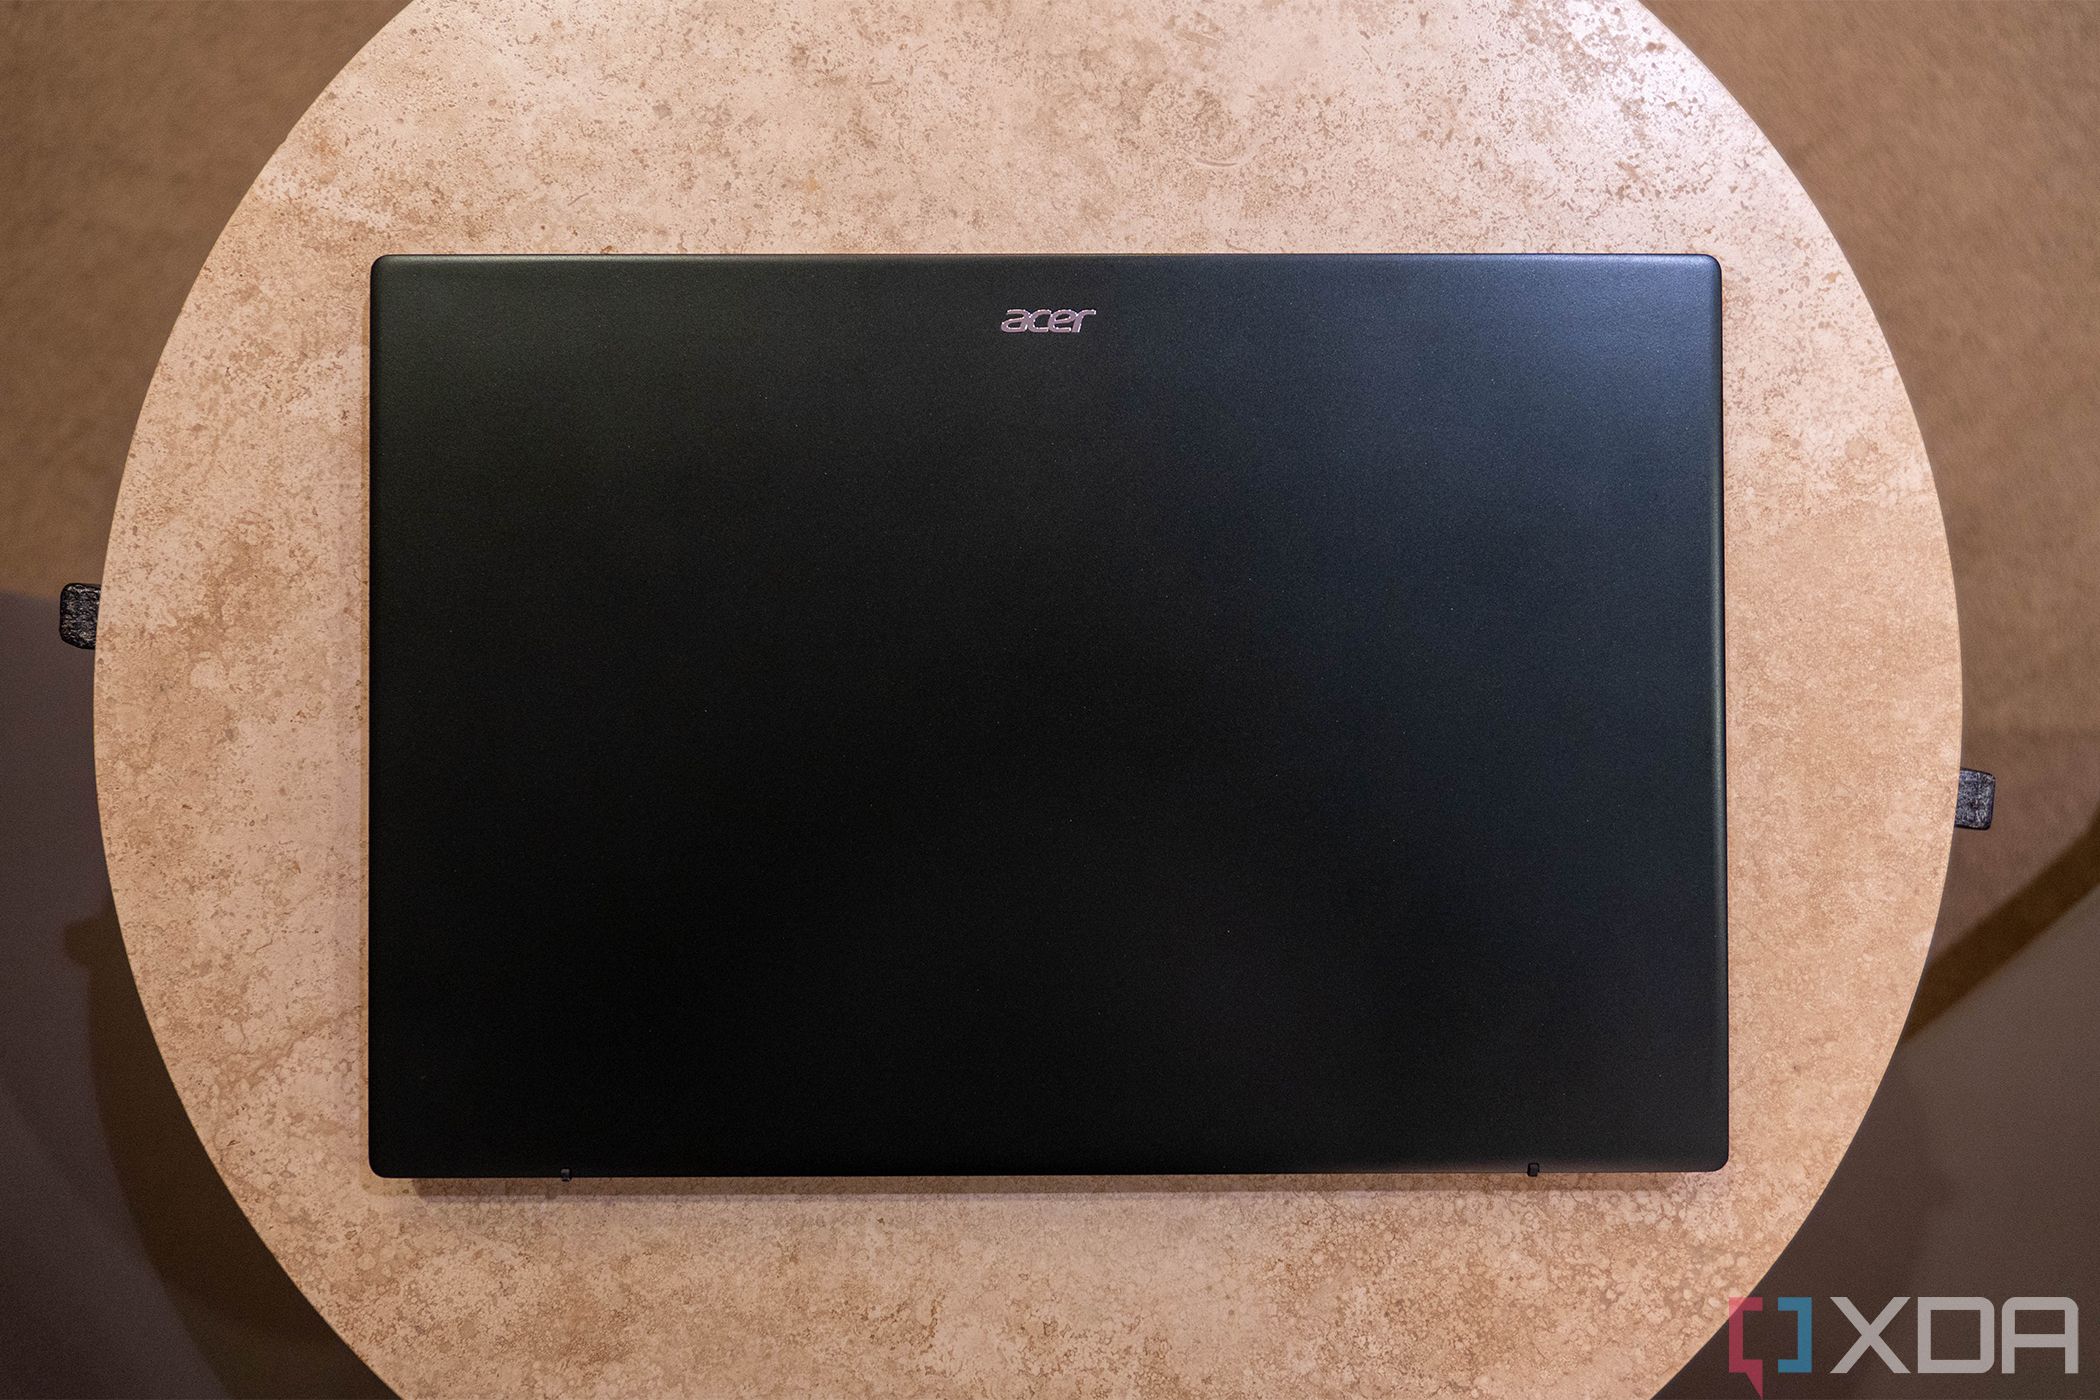 Top down view of Acer laptop